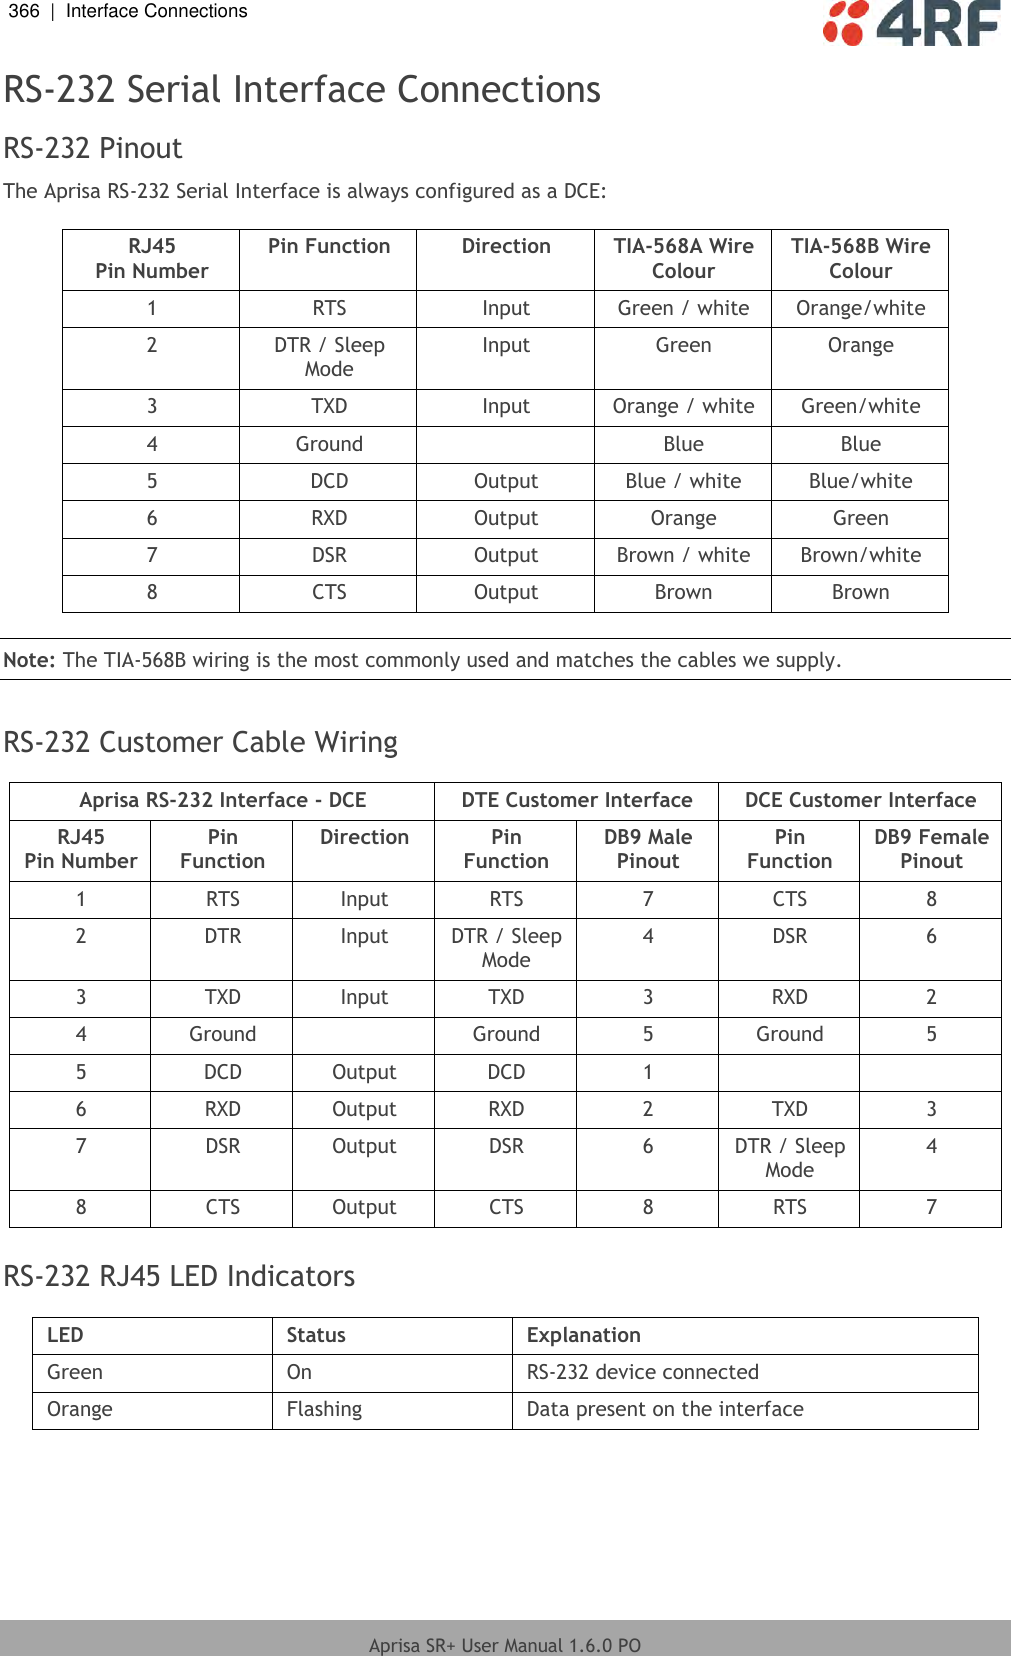 366  |  Interface Connections   Aprisa SR+ User Manual 1.6.0 PO  RS-232 Serial Interface Connections RS-232 Pinout The Aprisa RS-232 Serial Interface is always configured as a DCE:  RJ45 Pin Number Pin Function Direction TIA-568A Wire Colour TIA-568B Wire Colour 1 RTS Input Green / white Orange/white 2 DTR / Sleep Mode Input Green Orange 3 TXD Input Orange / white Green/white 4 Ground  Blue Blue 5 DCD Output Blue / white Blue/white 6 RXD Output Orange Green 7 DSR Output Brown / white Brown/white 8 CTS Output Brown Brown  Note: The TIA-568B wiring is the most commonly used and matches the cables we supply.  RS-232 Customer Cable Wiring  Aprisa RS-232 Interface - DCE DTE Customer Interface DCE Customer Interface RJ45 Pin Number Pin Function Direction Pin Function DB9 Male Pinout Pin Function DB9 Female Pinout 1 RTS Input RTS 7 CTS 8 2 DTR Input DTR / Sleep Mode 4 DSR 6 3 TXD Input TXD 3 RXD 2 4 Ground  Ground 5 Ground 5 5 DCD Output DCD 1   6 RXD Output RXD 2 TXD 3 7 DSR Output DSR 6 DTR / Sleep Mode 4 8 CTS Output CTS 8 RTS 7  RS-232 RJ45 LED Indicators  LED Status Explanation Green On RS-232 device connected Orange Flashing Data present on the interface  